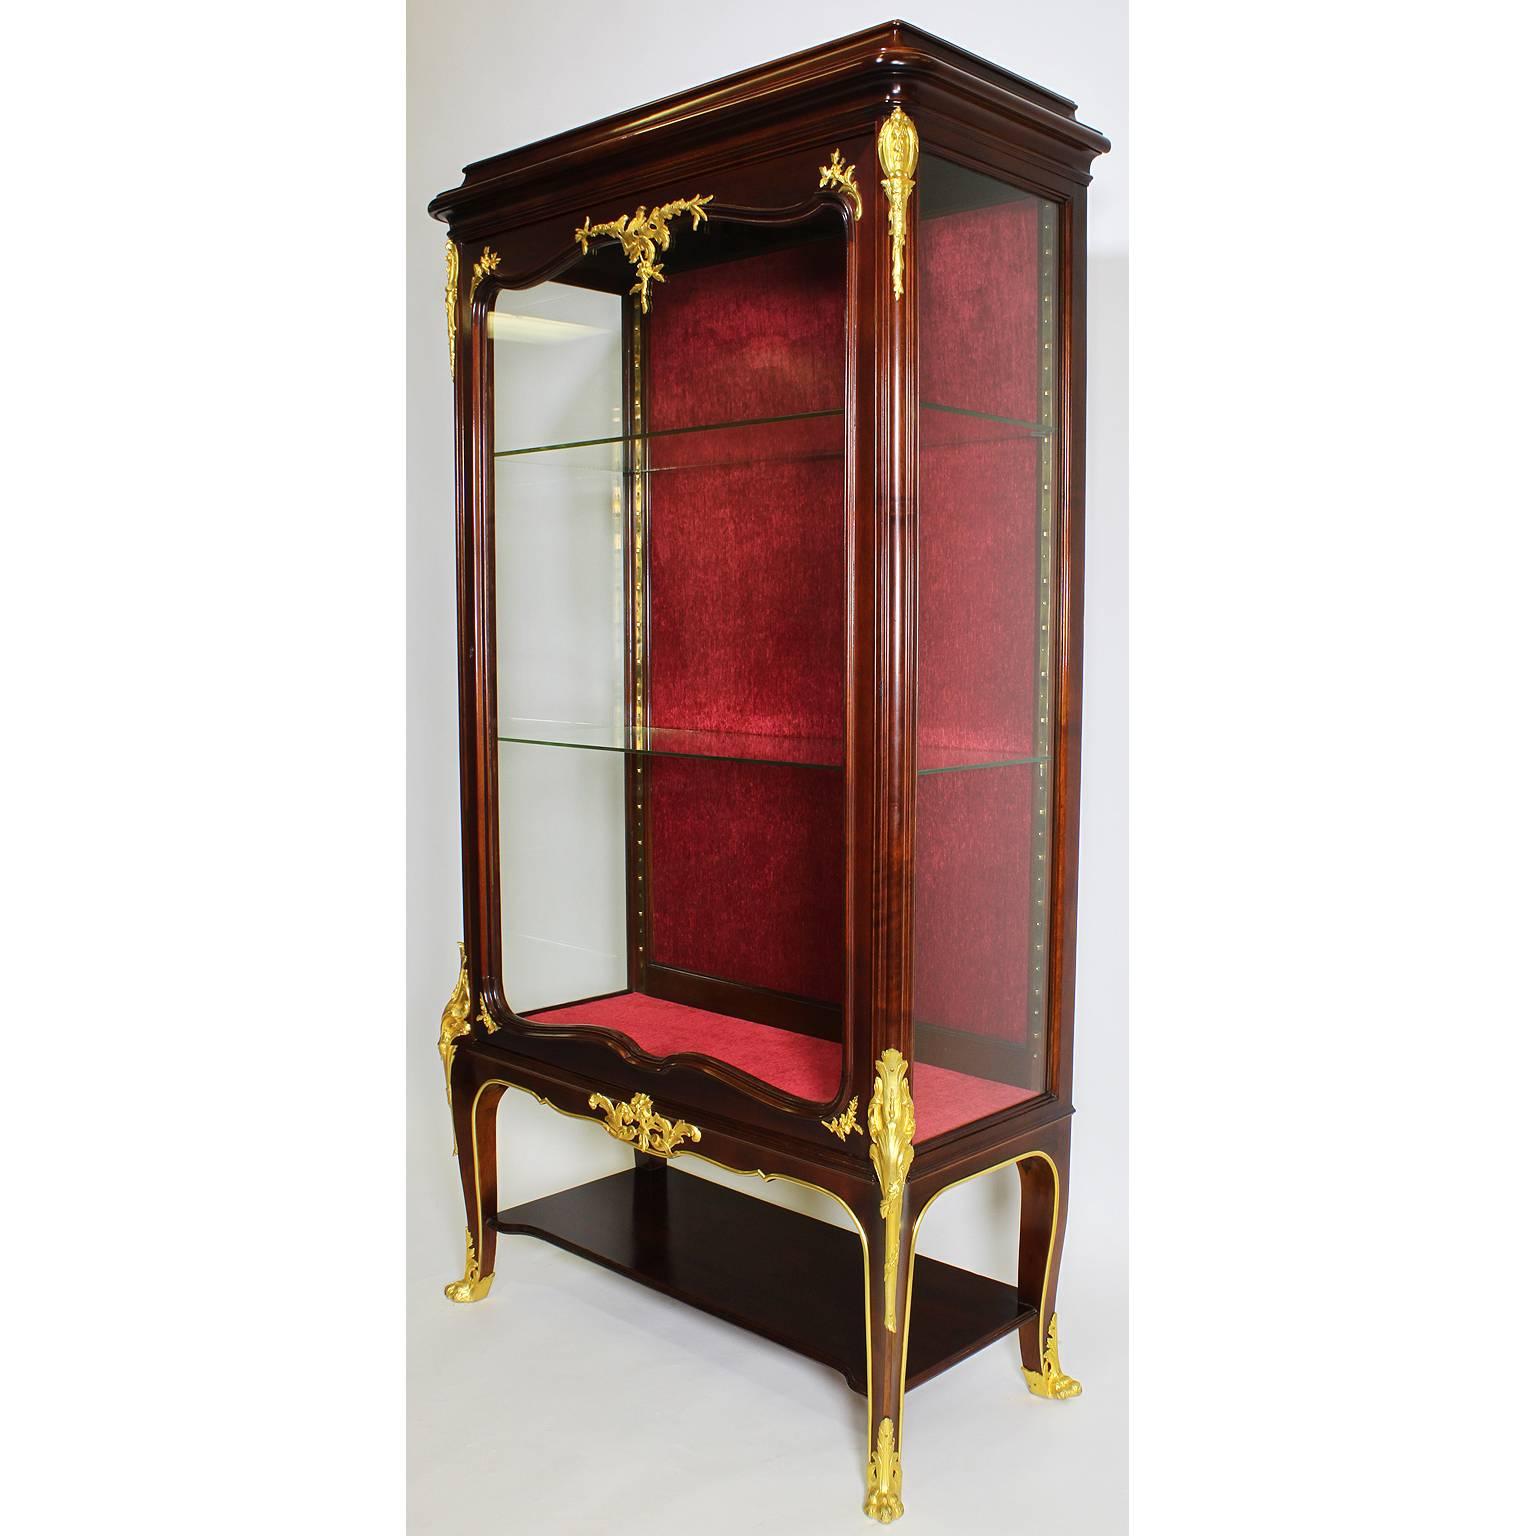 A fine French 19th-20th century Louis XV style mahogany and gilt bronze-mounted Vitrine by Haentges Freres. The single door cabinet surmounted with ormolu mounts with floral motifs, raised on four cabriolet legs with corner mounts with lion paw